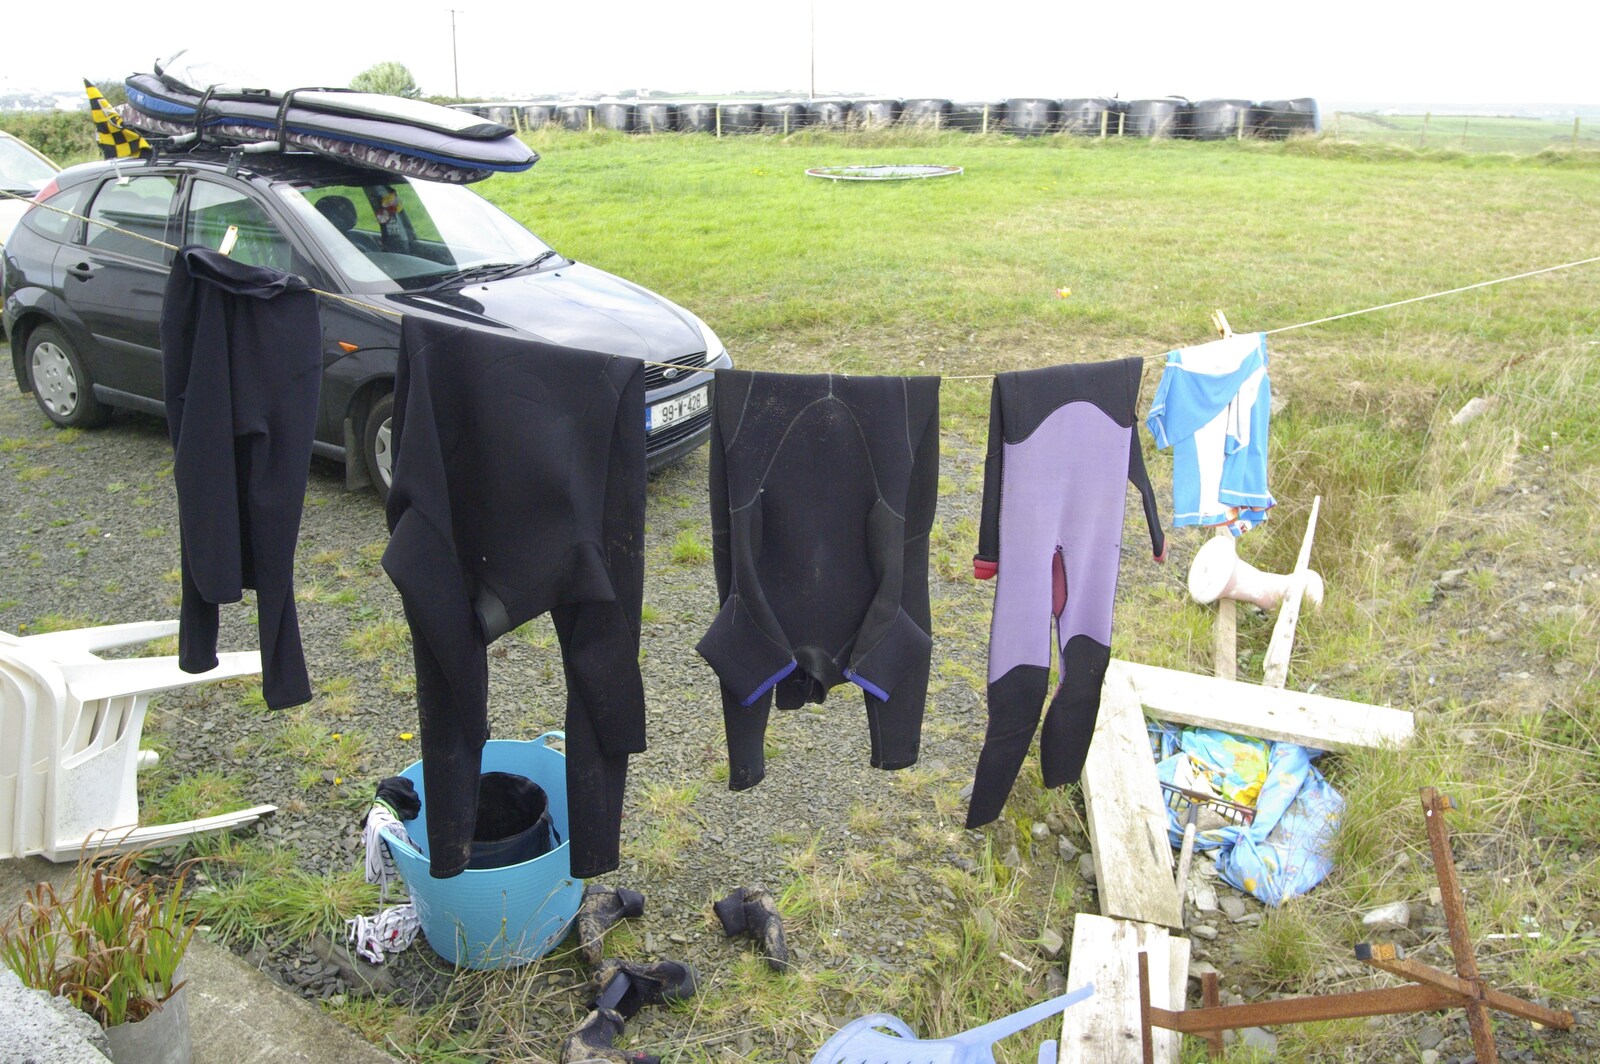 30th Birthday Party in Kilkee, County Clare, Ireland - 22nd September 2007: Wetsuits on the line